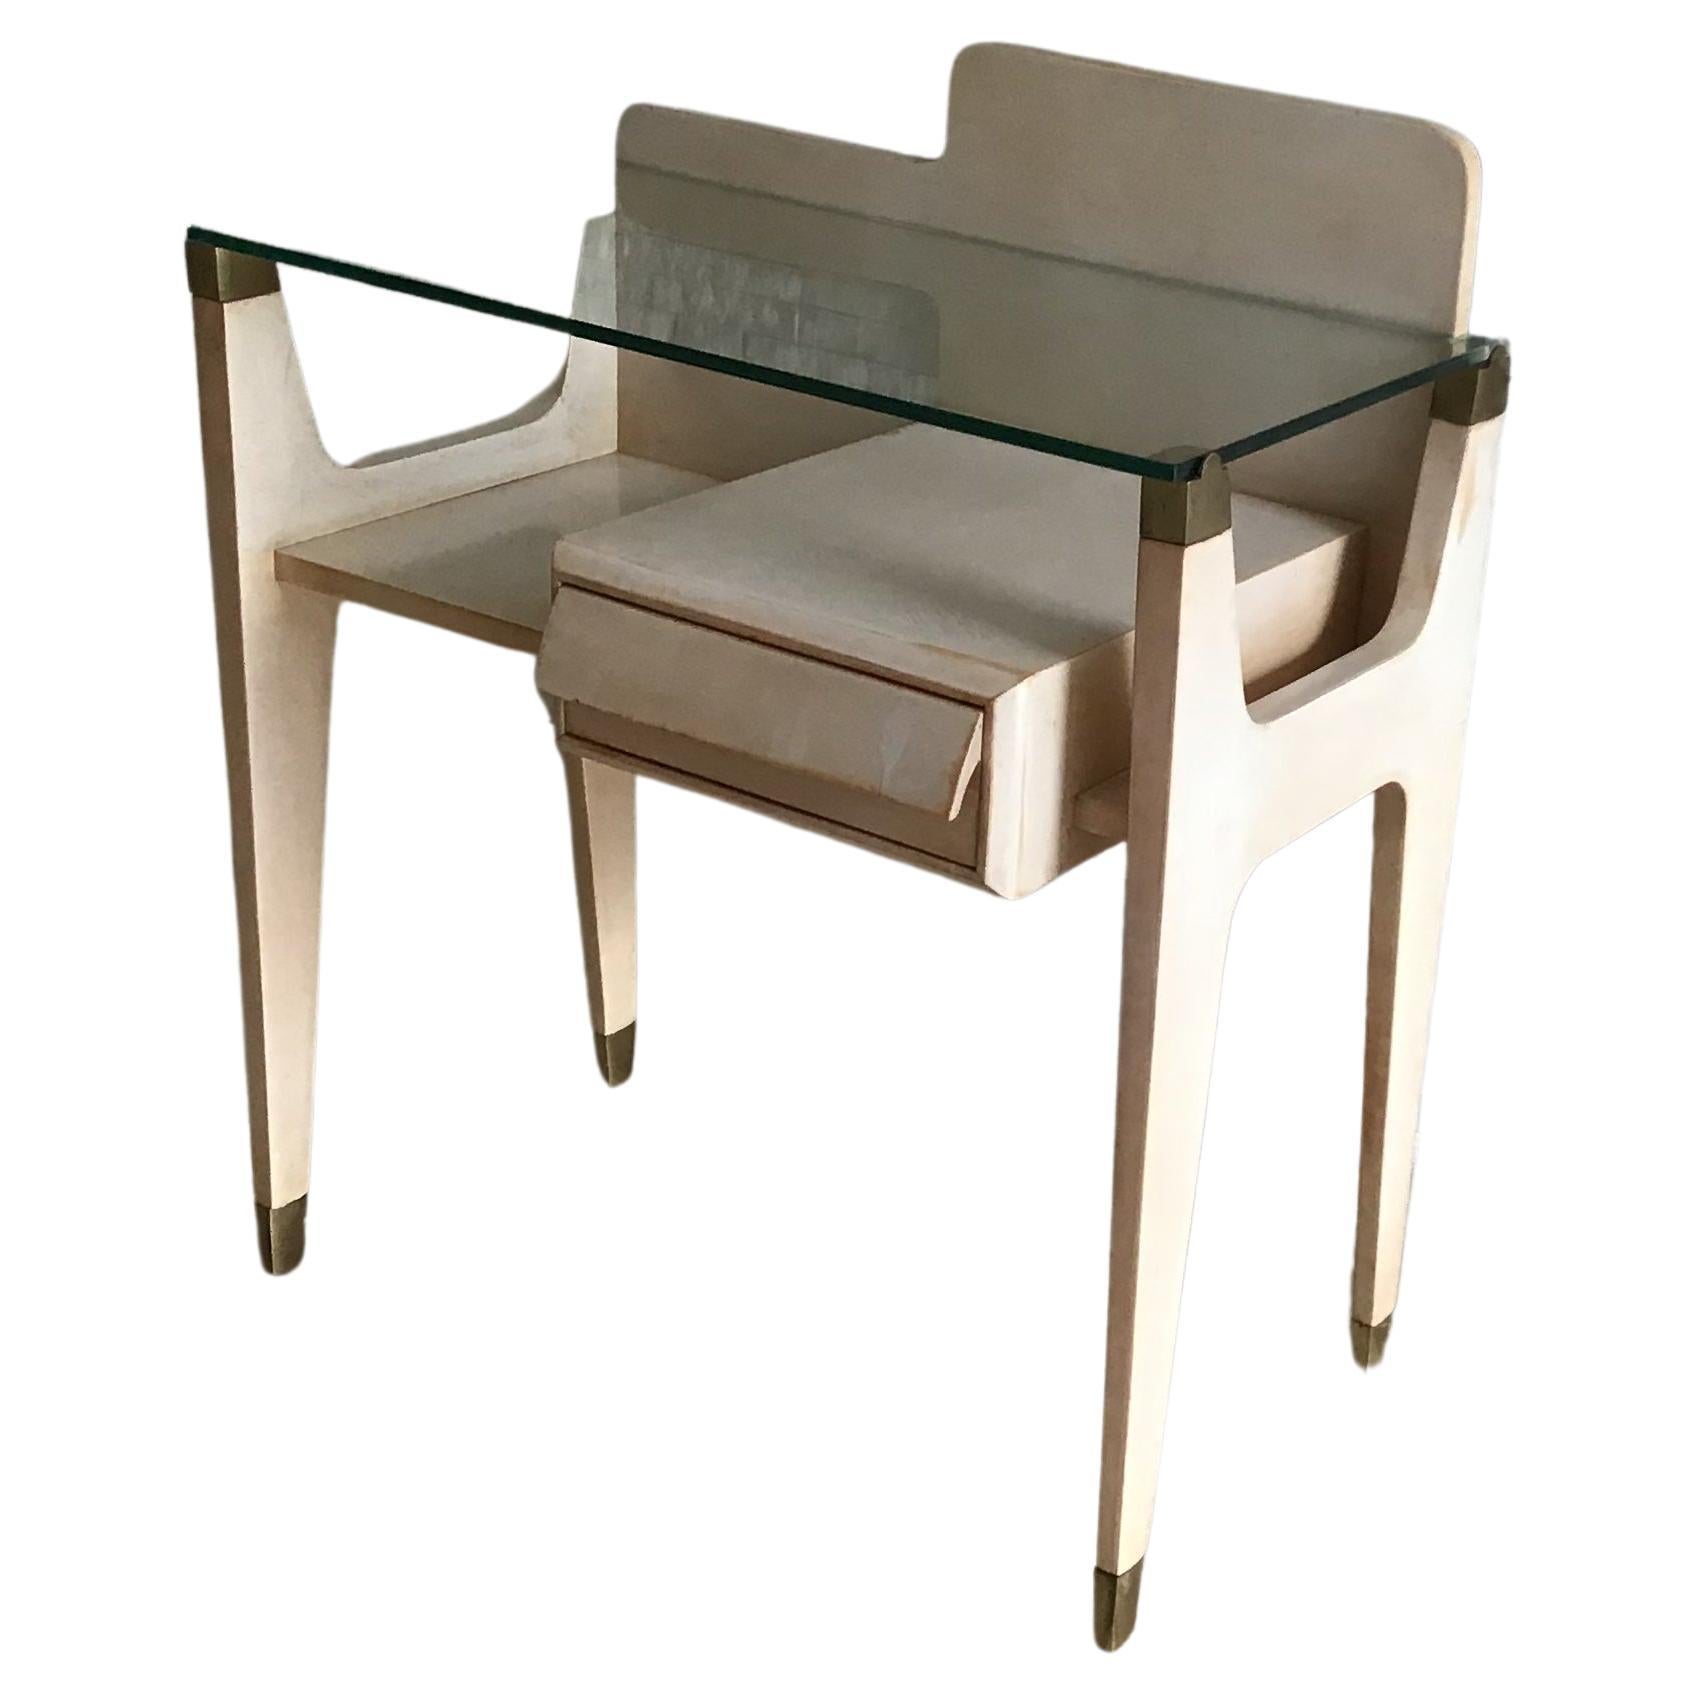 Gio’ Ponti “ Stile “ Bedside Tables Brass Wood Glass 1950 Italy  For Sale